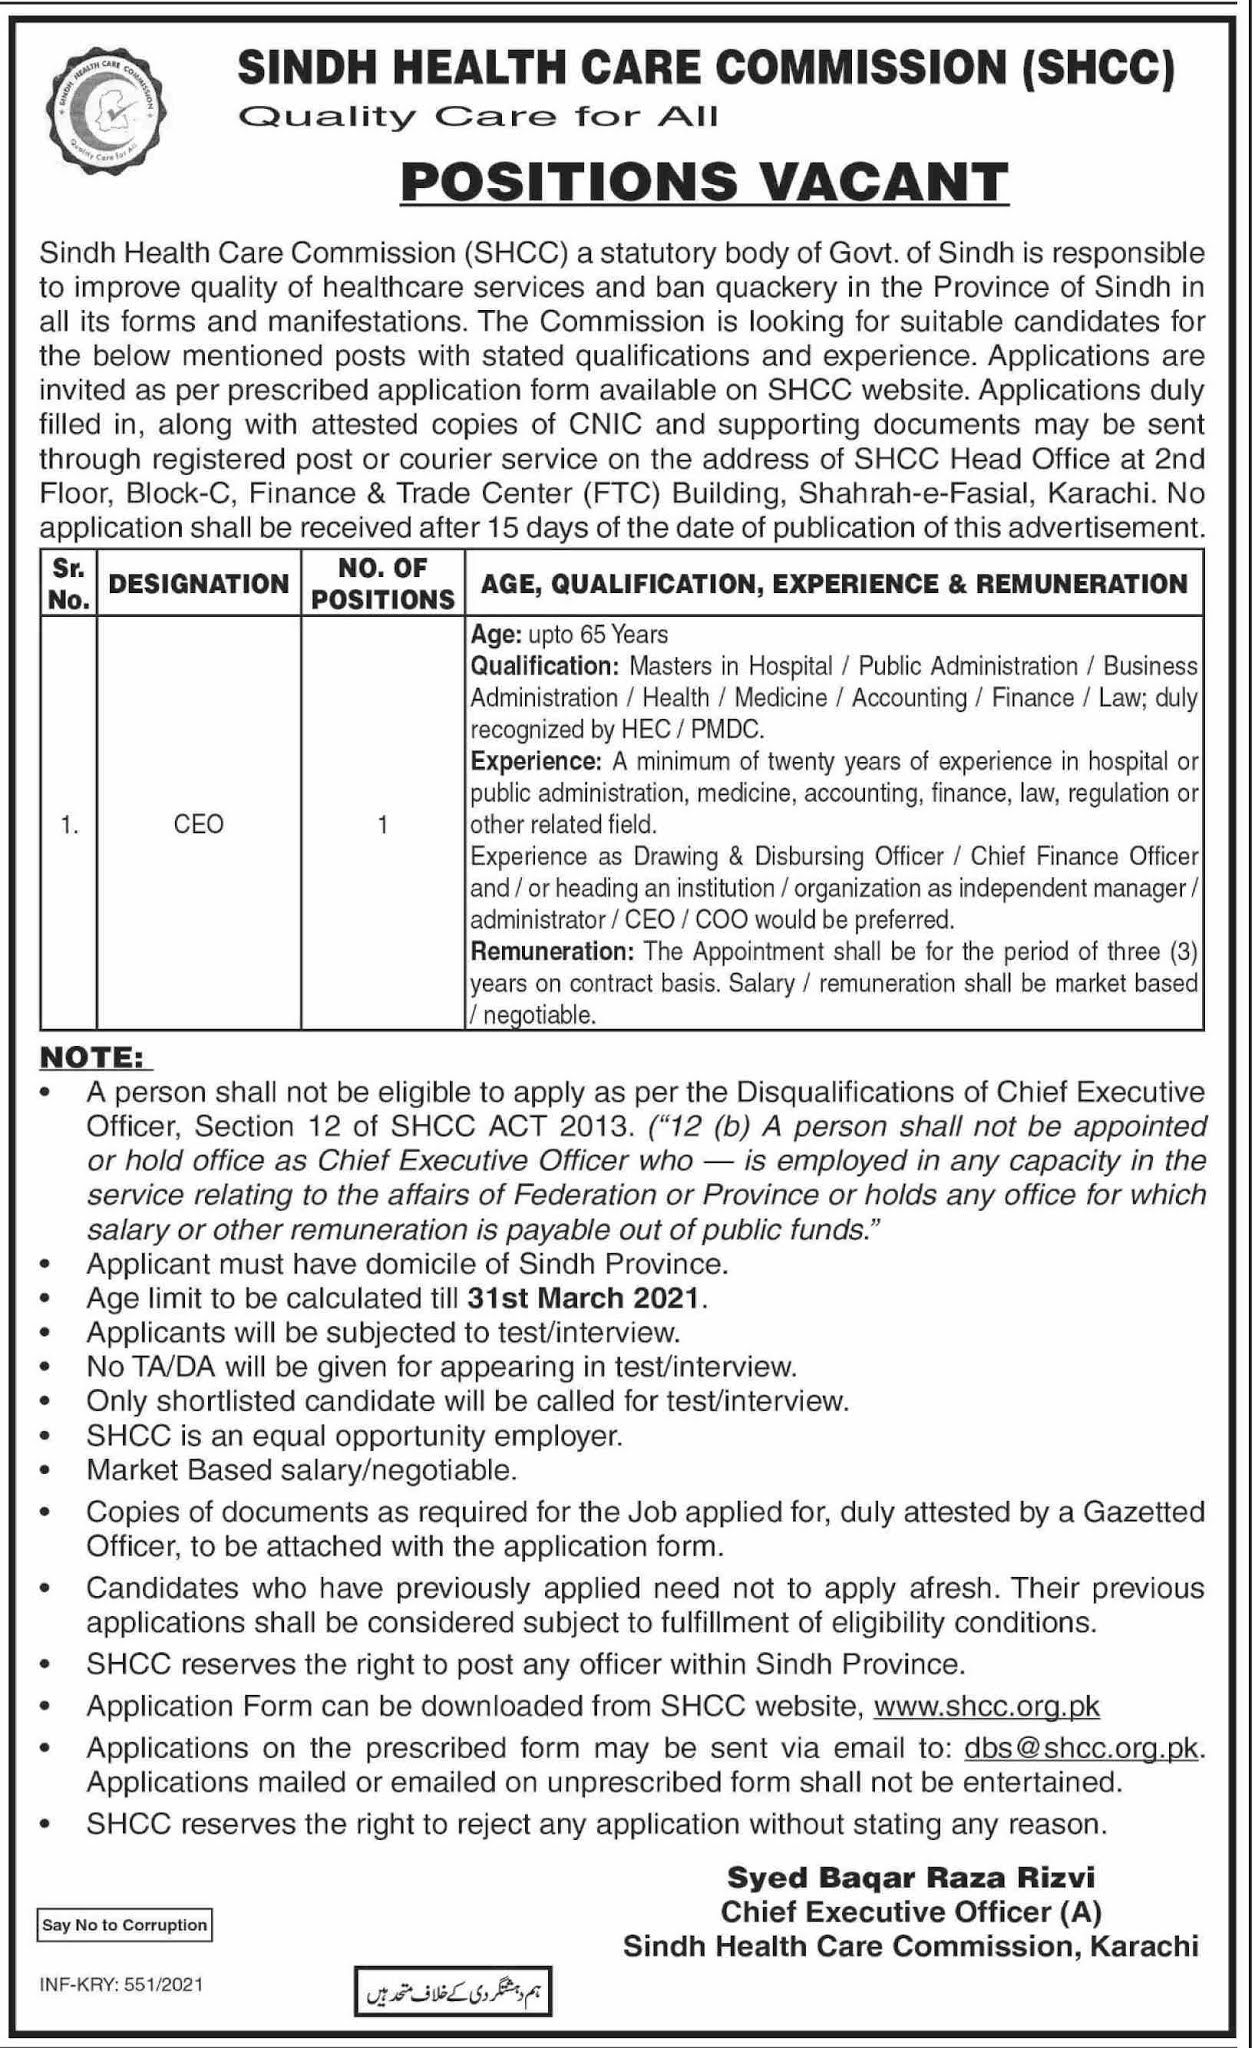 Sindh Health Care Commission (SHCC) Jobs 2021 in Pakistan - Chief Executive Officer CEO Jobs 2021 - Download Job Application Form - www.shcc.org.pk - dbs@shcc.org.pk